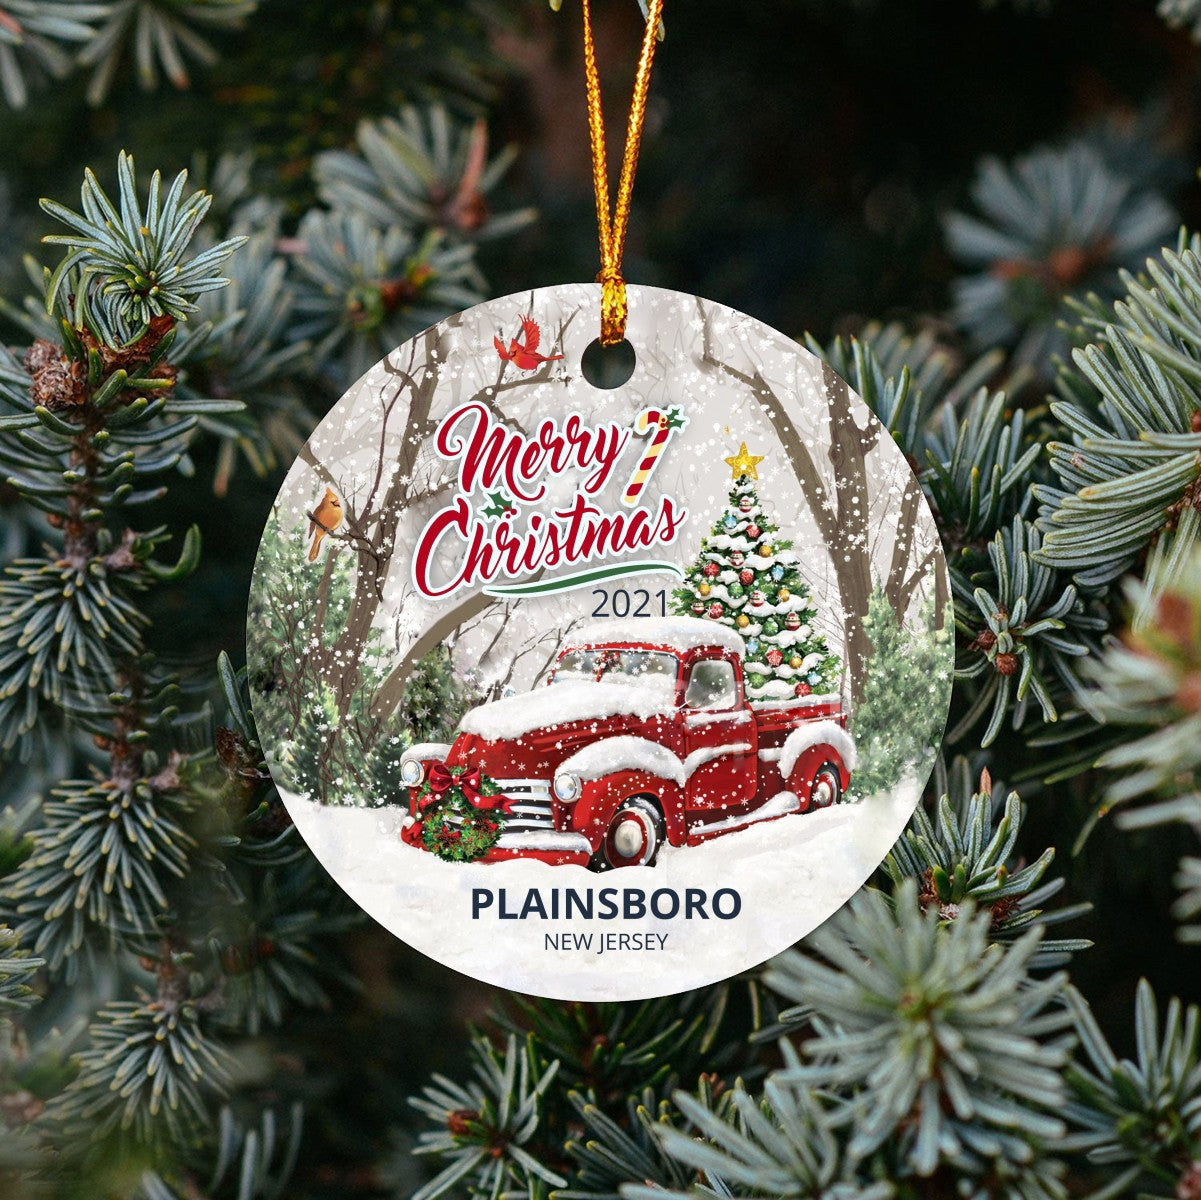 Christmas Tree Ornaments Plainsboro - Ornament With Name City, State Plainsboro New Jersey NJ Ornament - Red Truck Xmas Ornaments 3'' Plastic Gift For Family, Friend And Housewarming